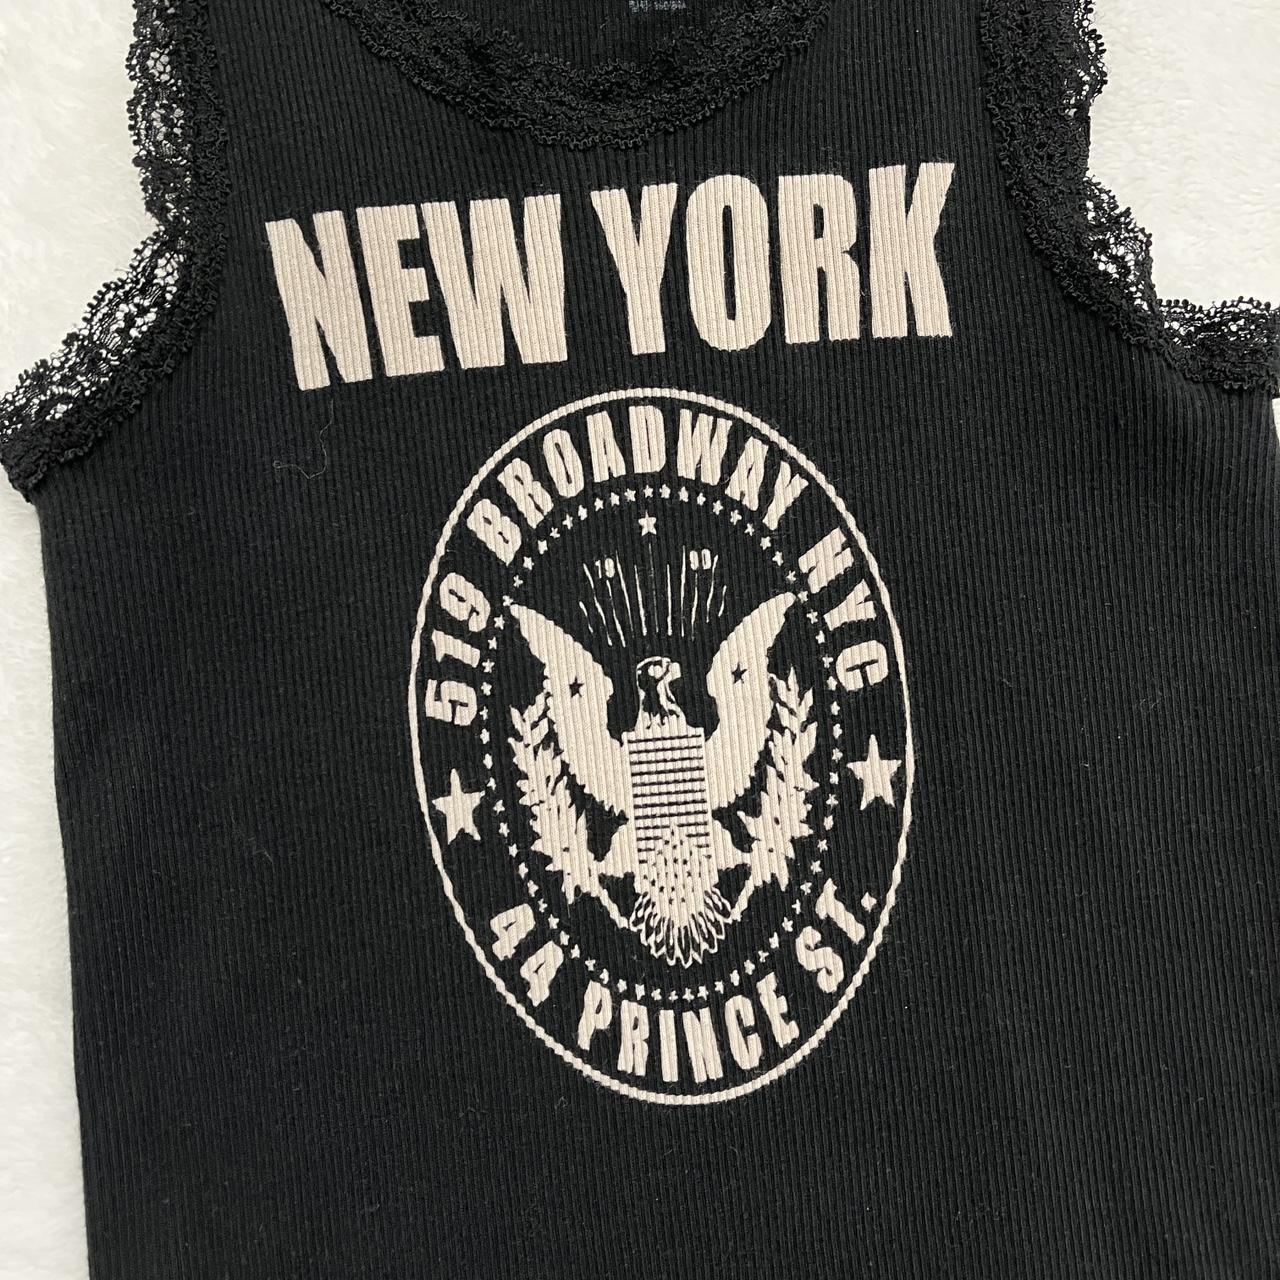 brandy melville new york graphic tank with lace - Depop